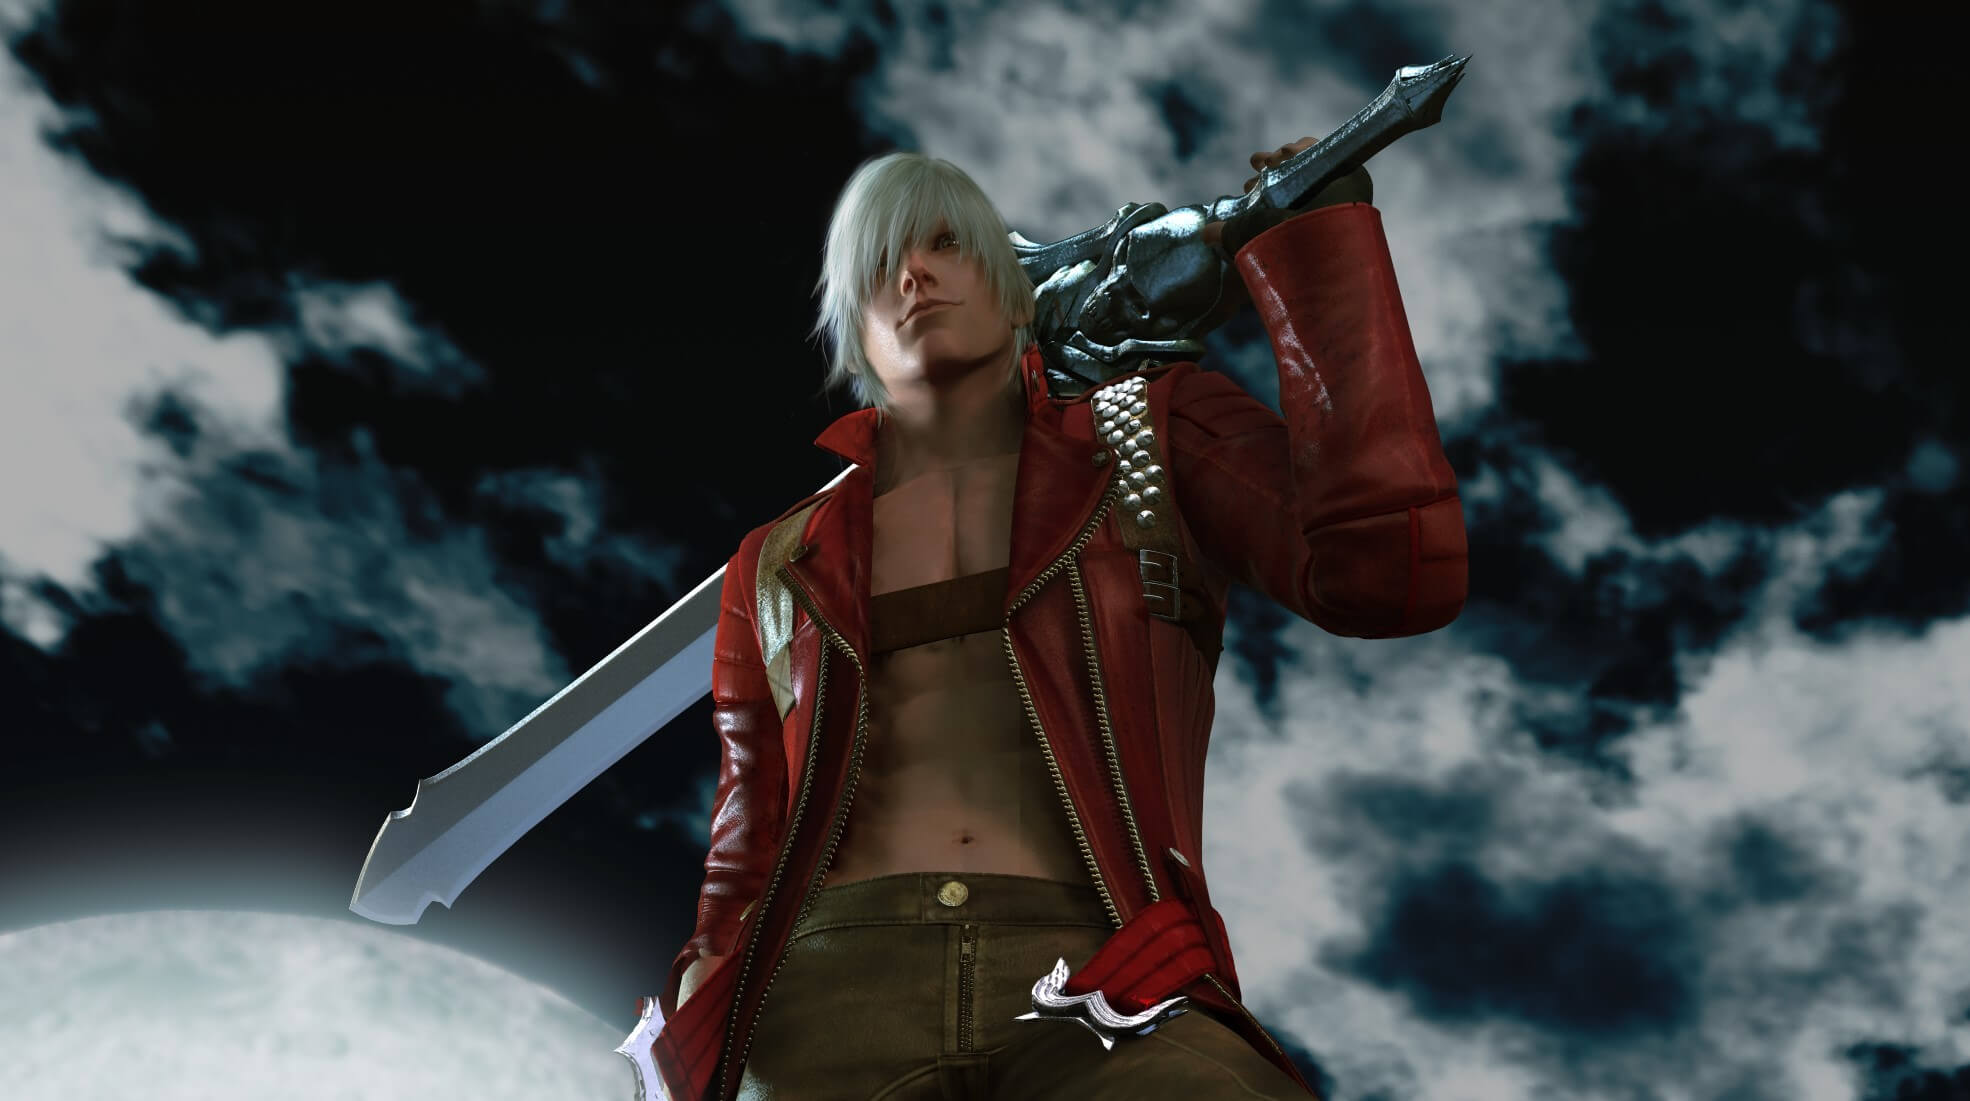 Devil May Cry 3: Special Edition - PS2 Gameplay 1080p (PCSX2) 